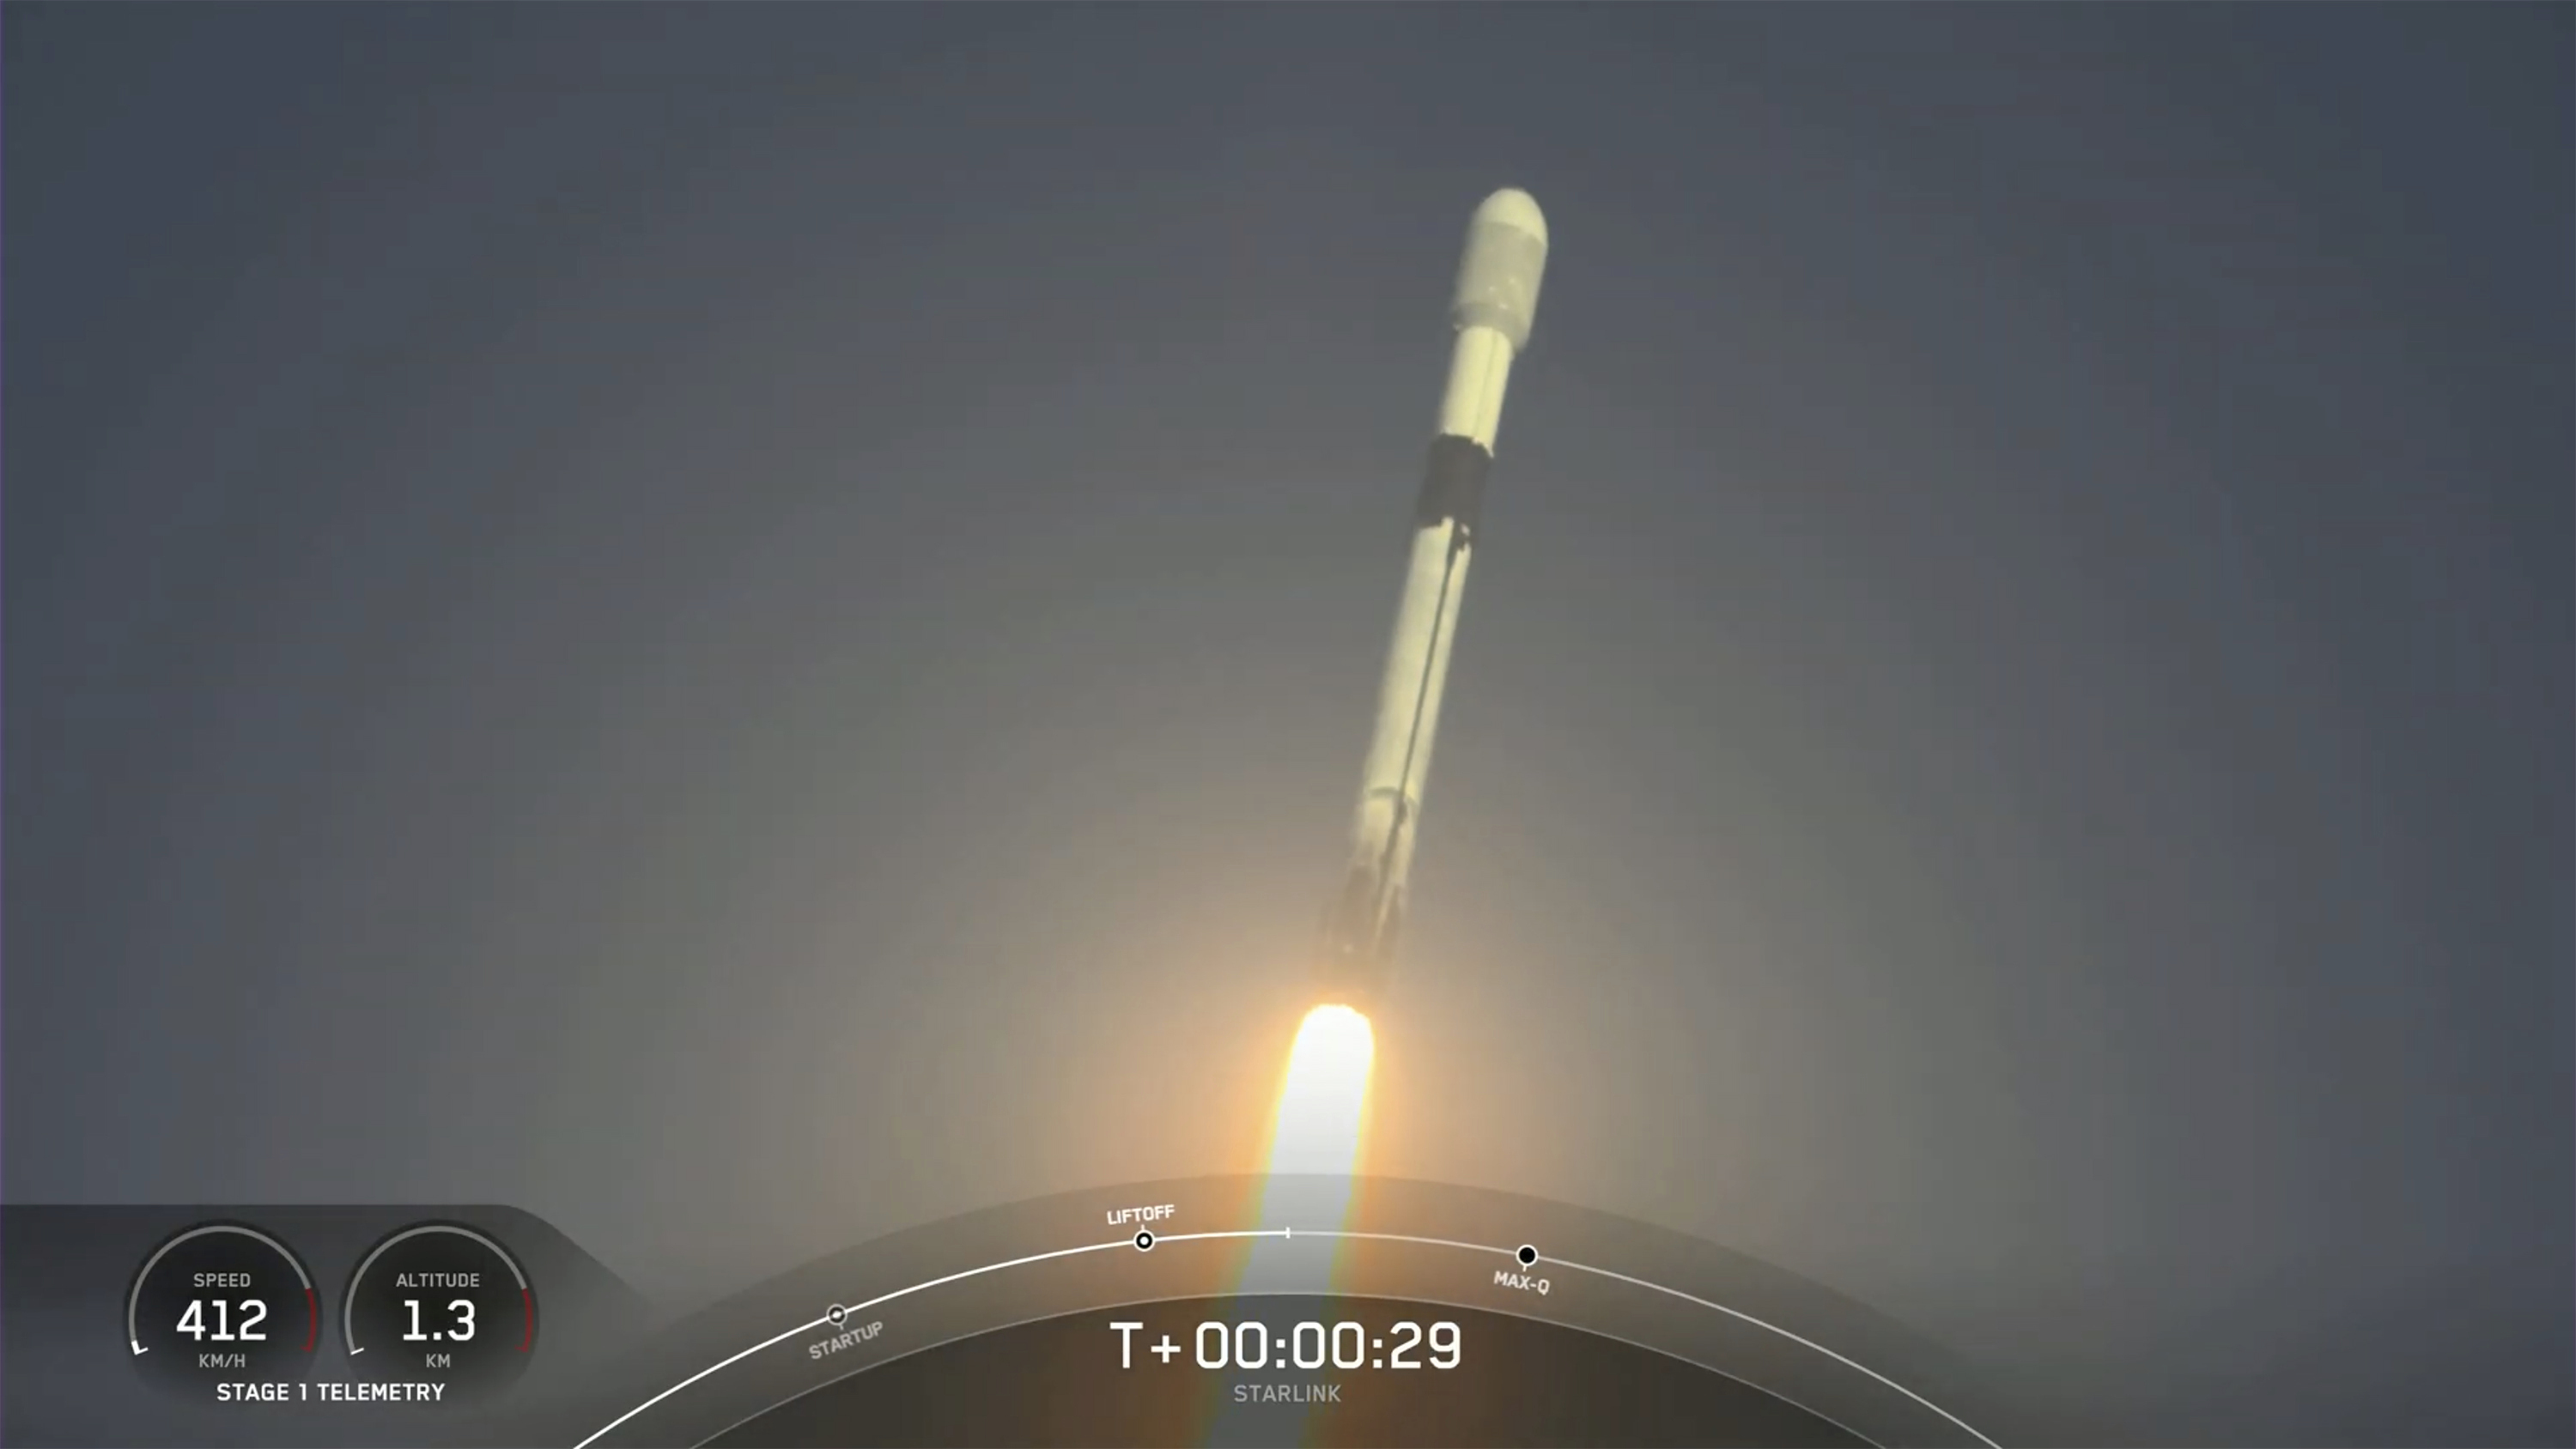 The rocket lifts off